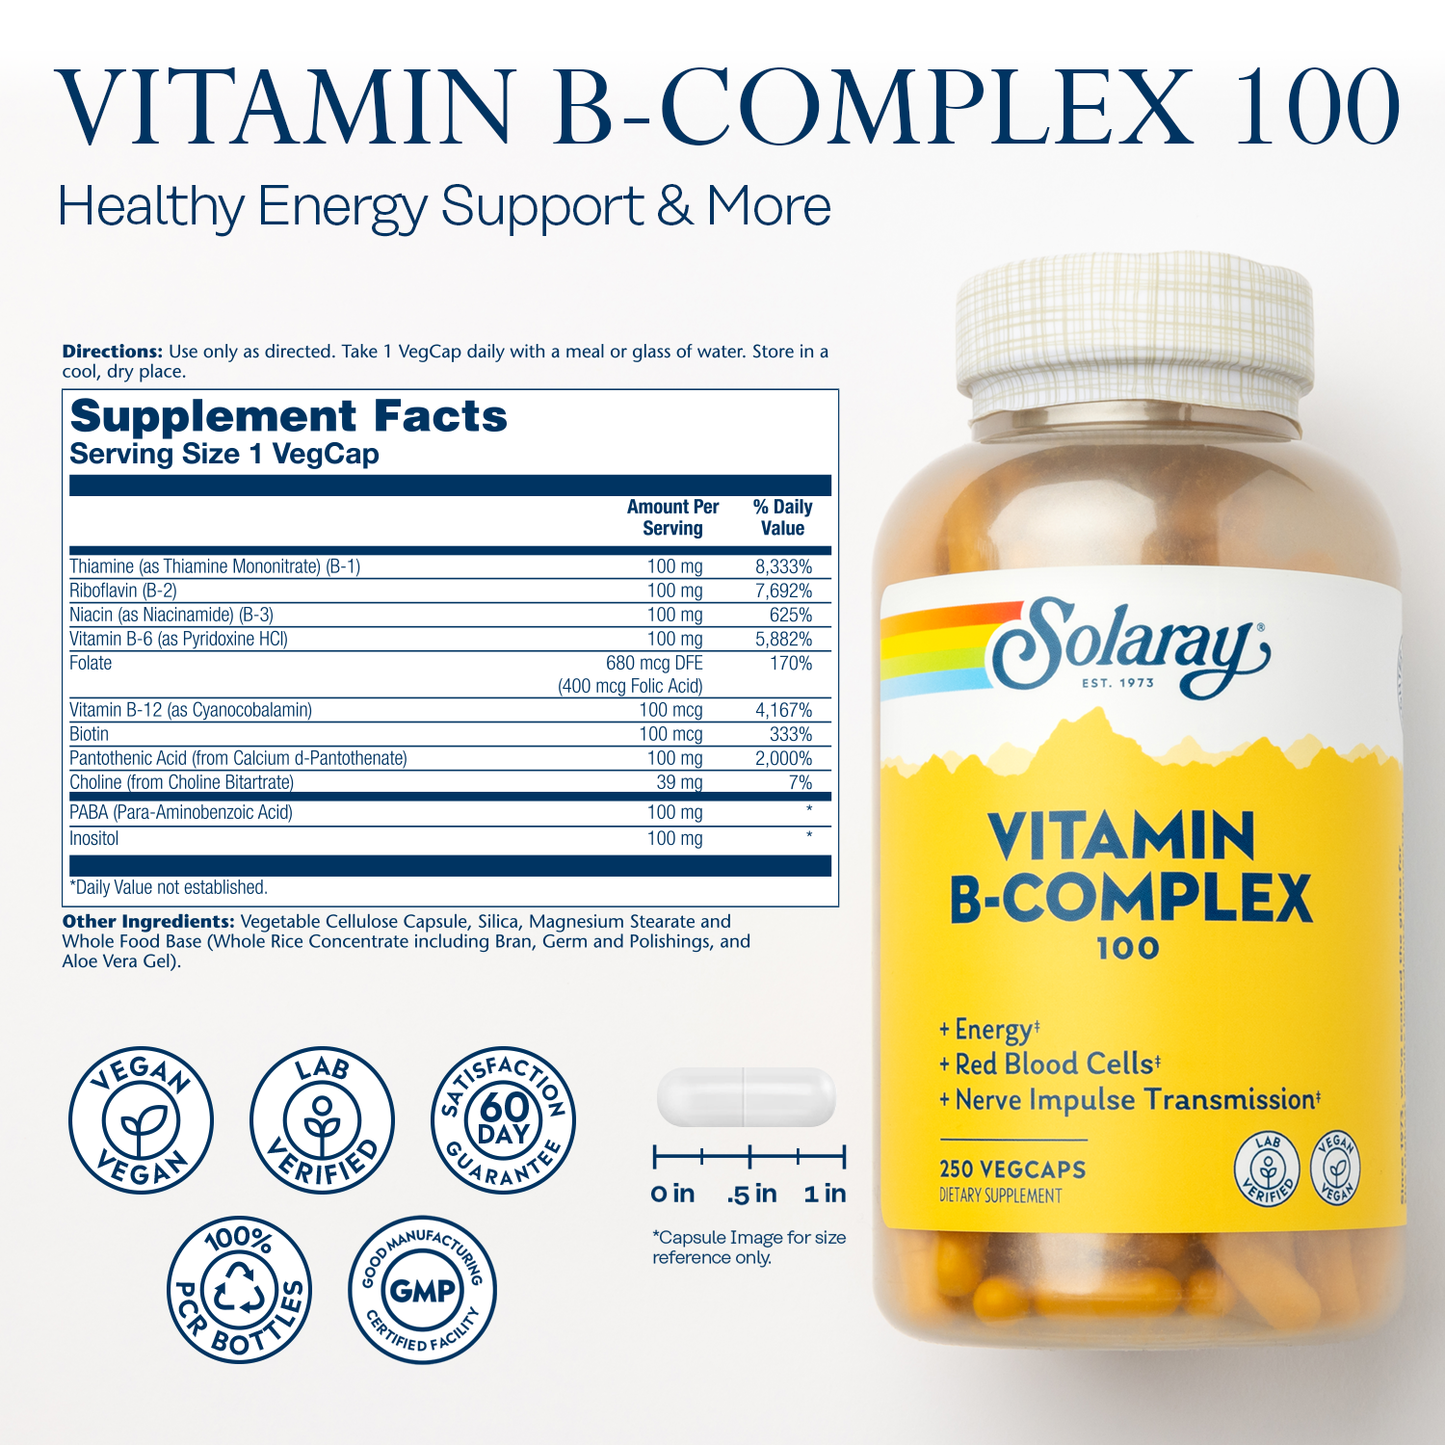 Solaray Vitamin B-Complex 100 Supports Healthy Hair & Skin, Immune System Function, Blood Cell Formation & Energy Metabolism , 250 VegCaps